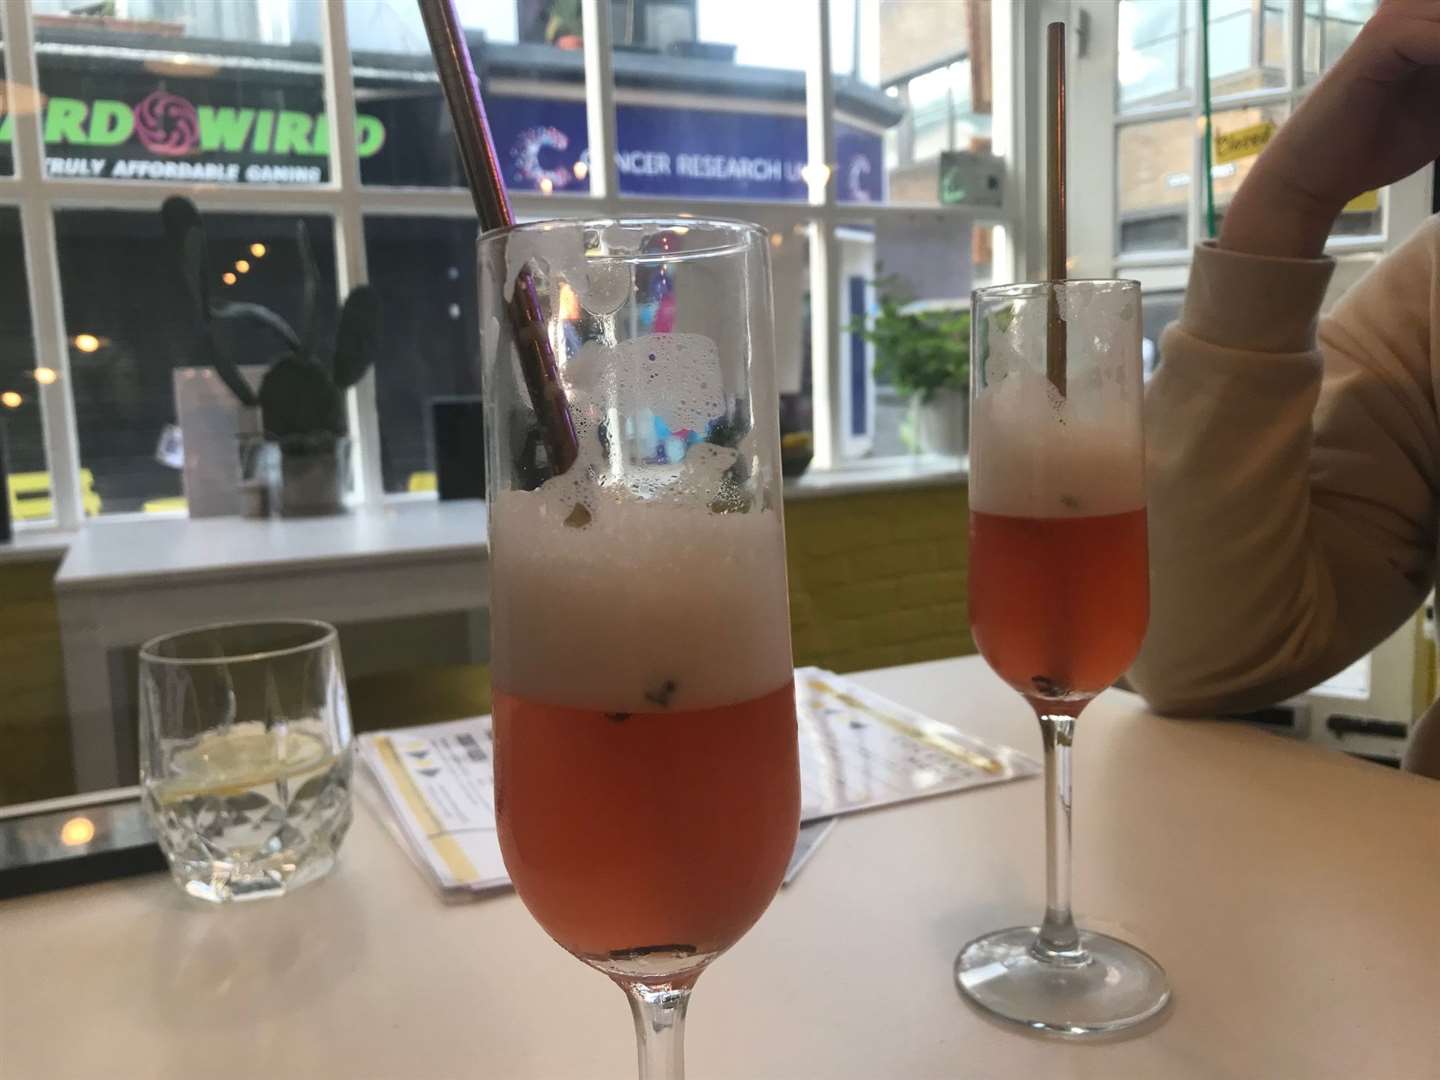 Cocktails overlooking the pedestrianised town centre in Ramsgate